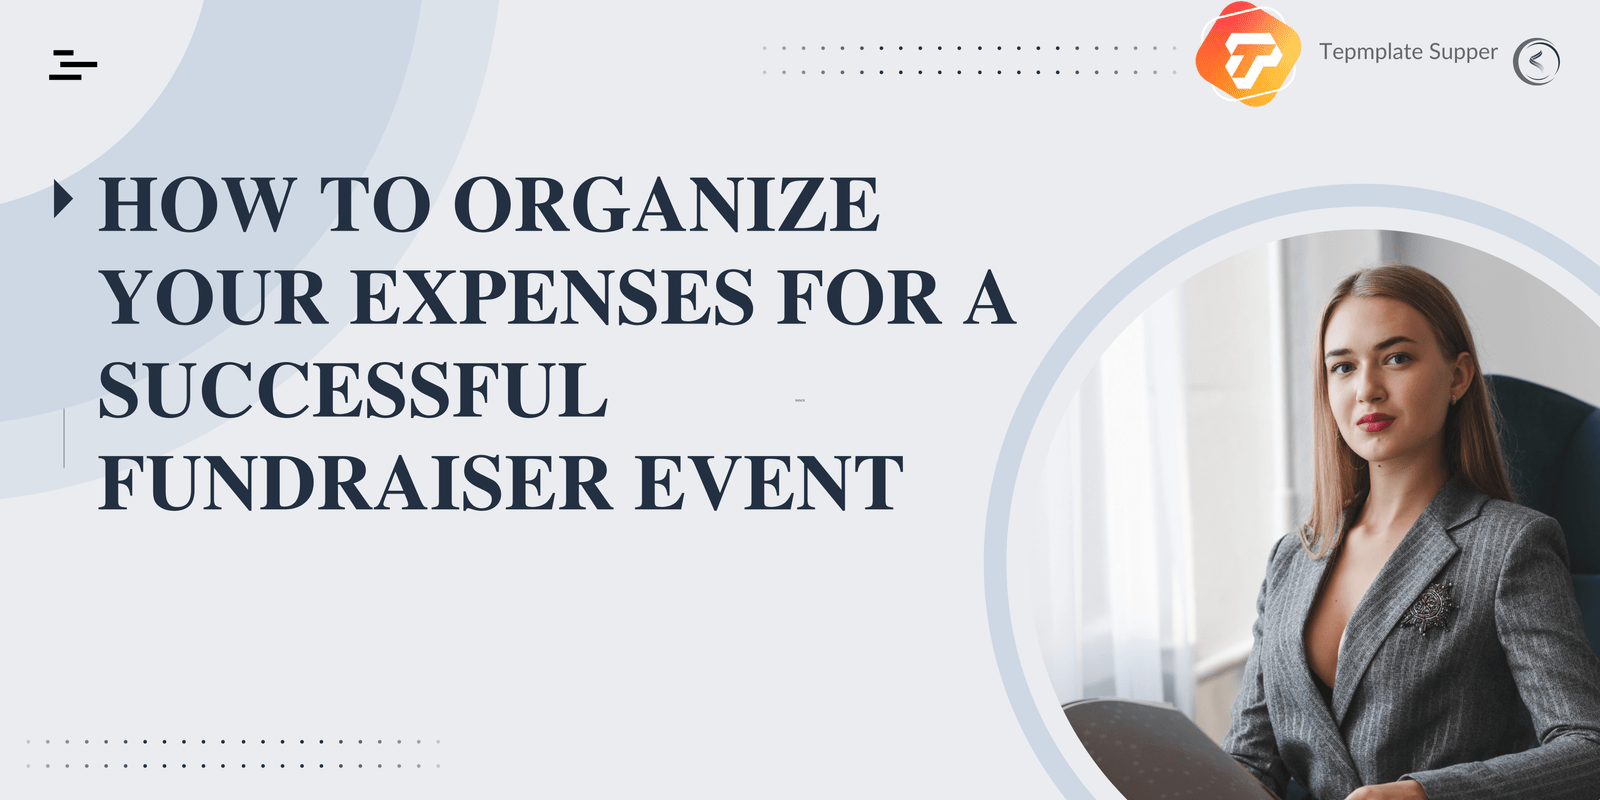 How to Organize Your Expenses for a Successful Fundraiser Event